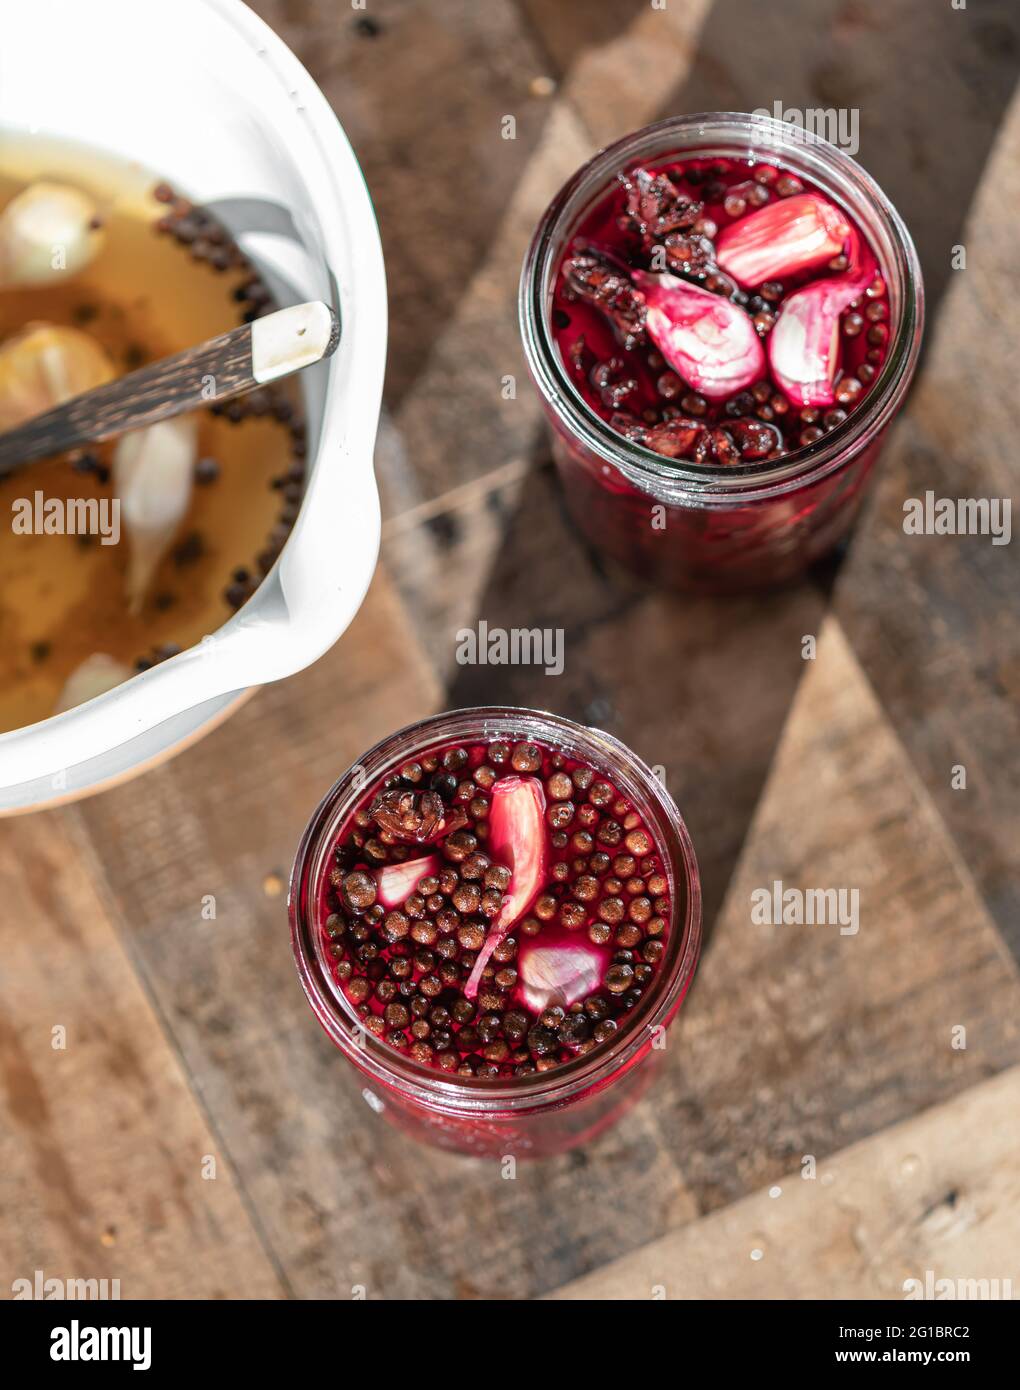 Pickles beets in brine with peppercorns and garlic. Rustic ambience, high contrast photography. Stock Photo